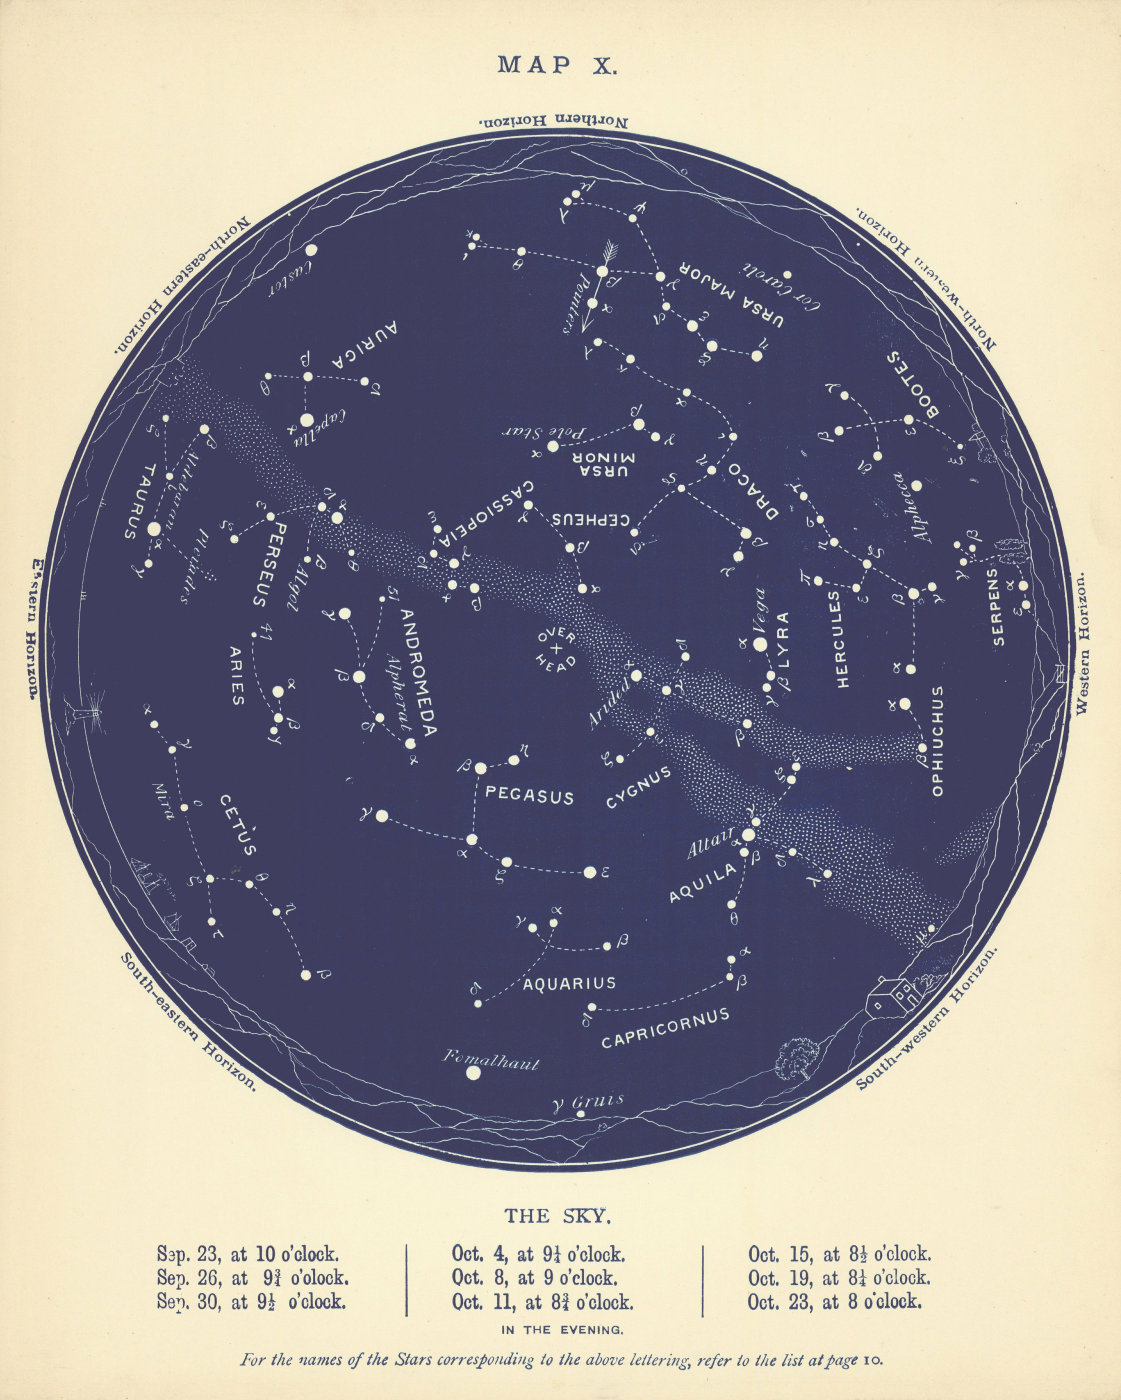 Associate Product STAR MAP X. The Night Sky. September-October. Astronomy. PROCTOR 1896 old